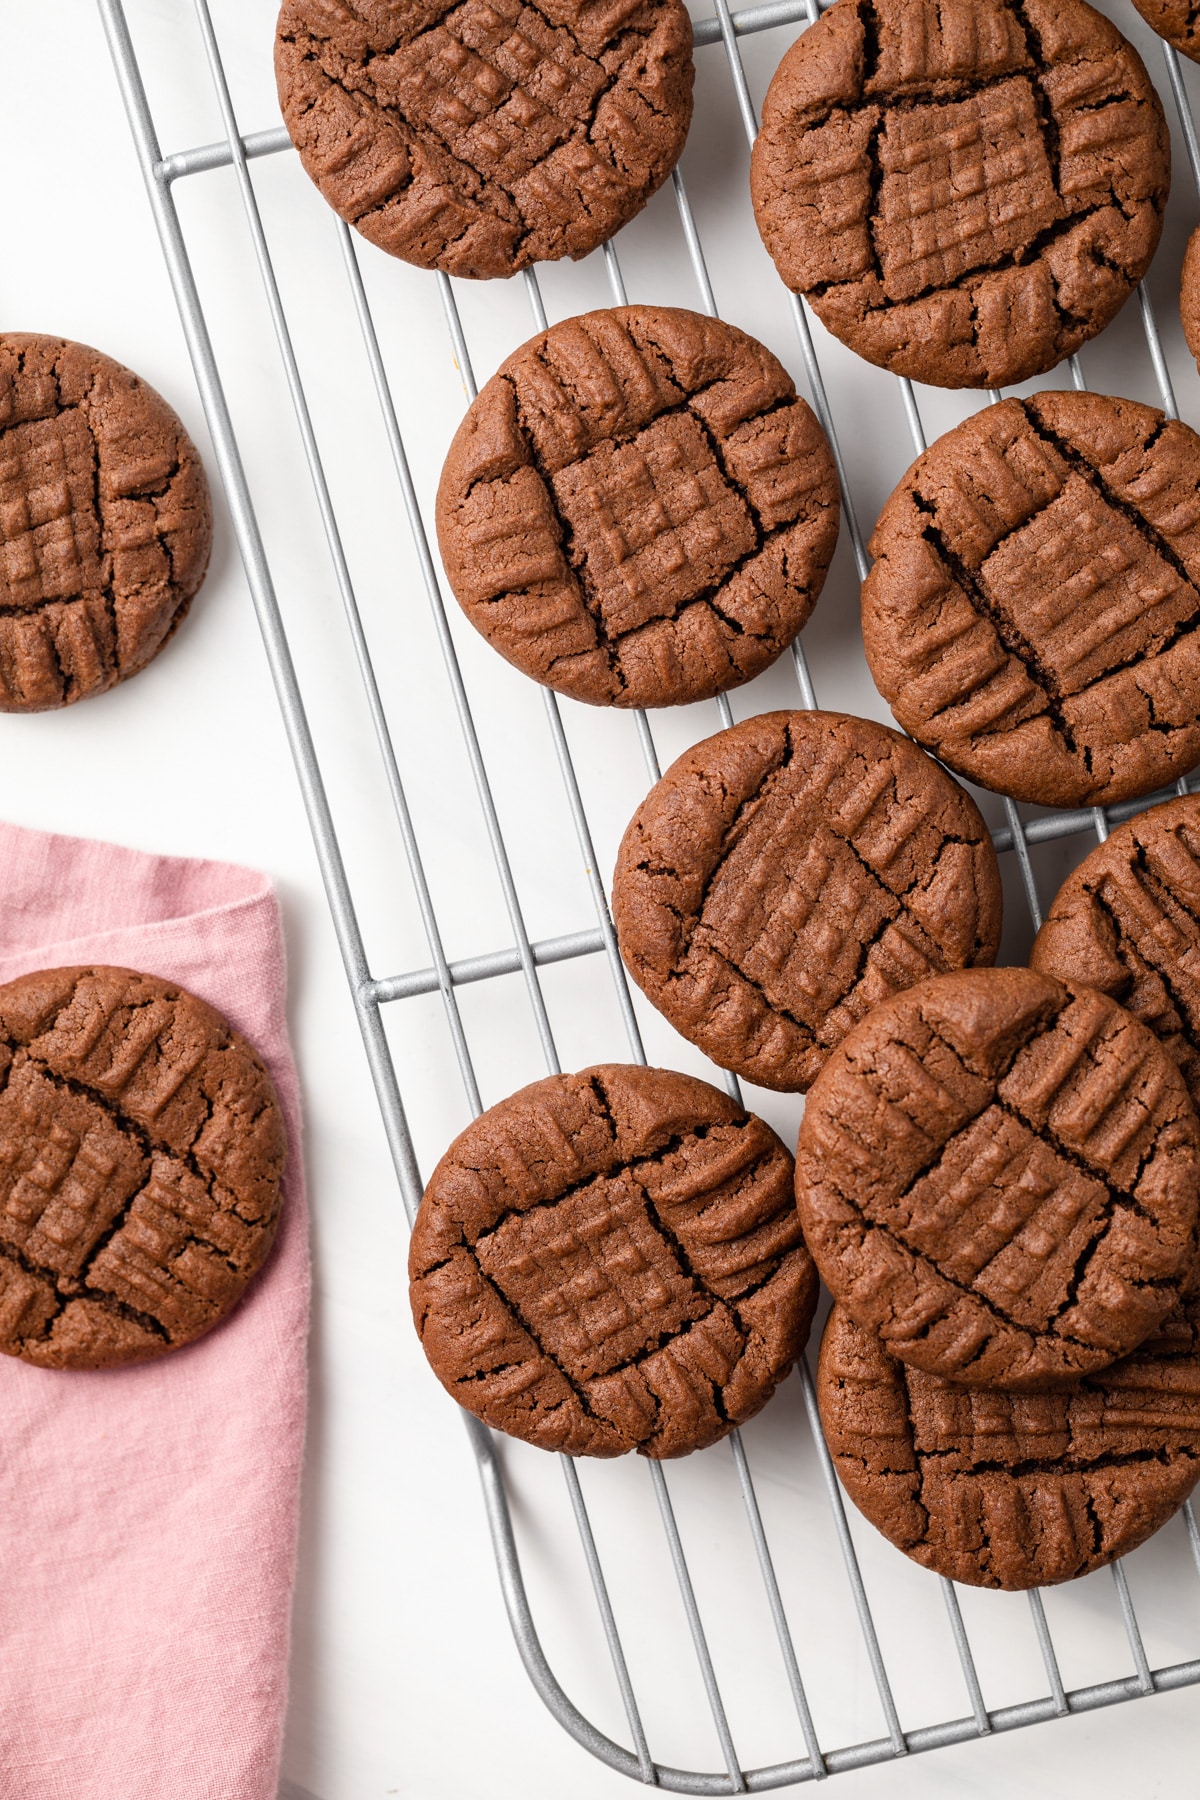 Chocolate peanut butter cookies on a wire rack,